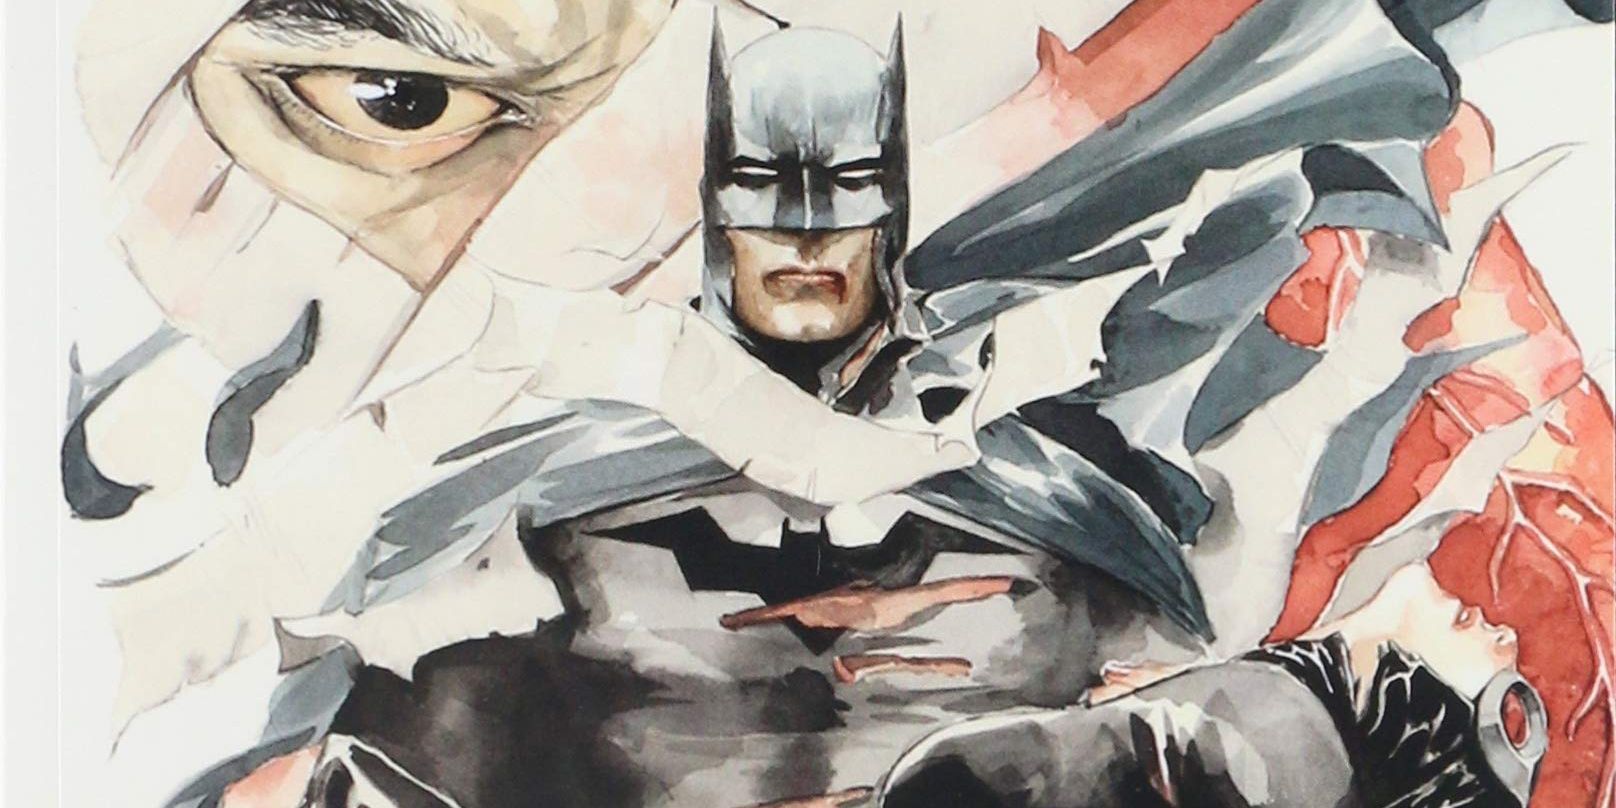 The cover art for Batman RIP: The Heart of Hush